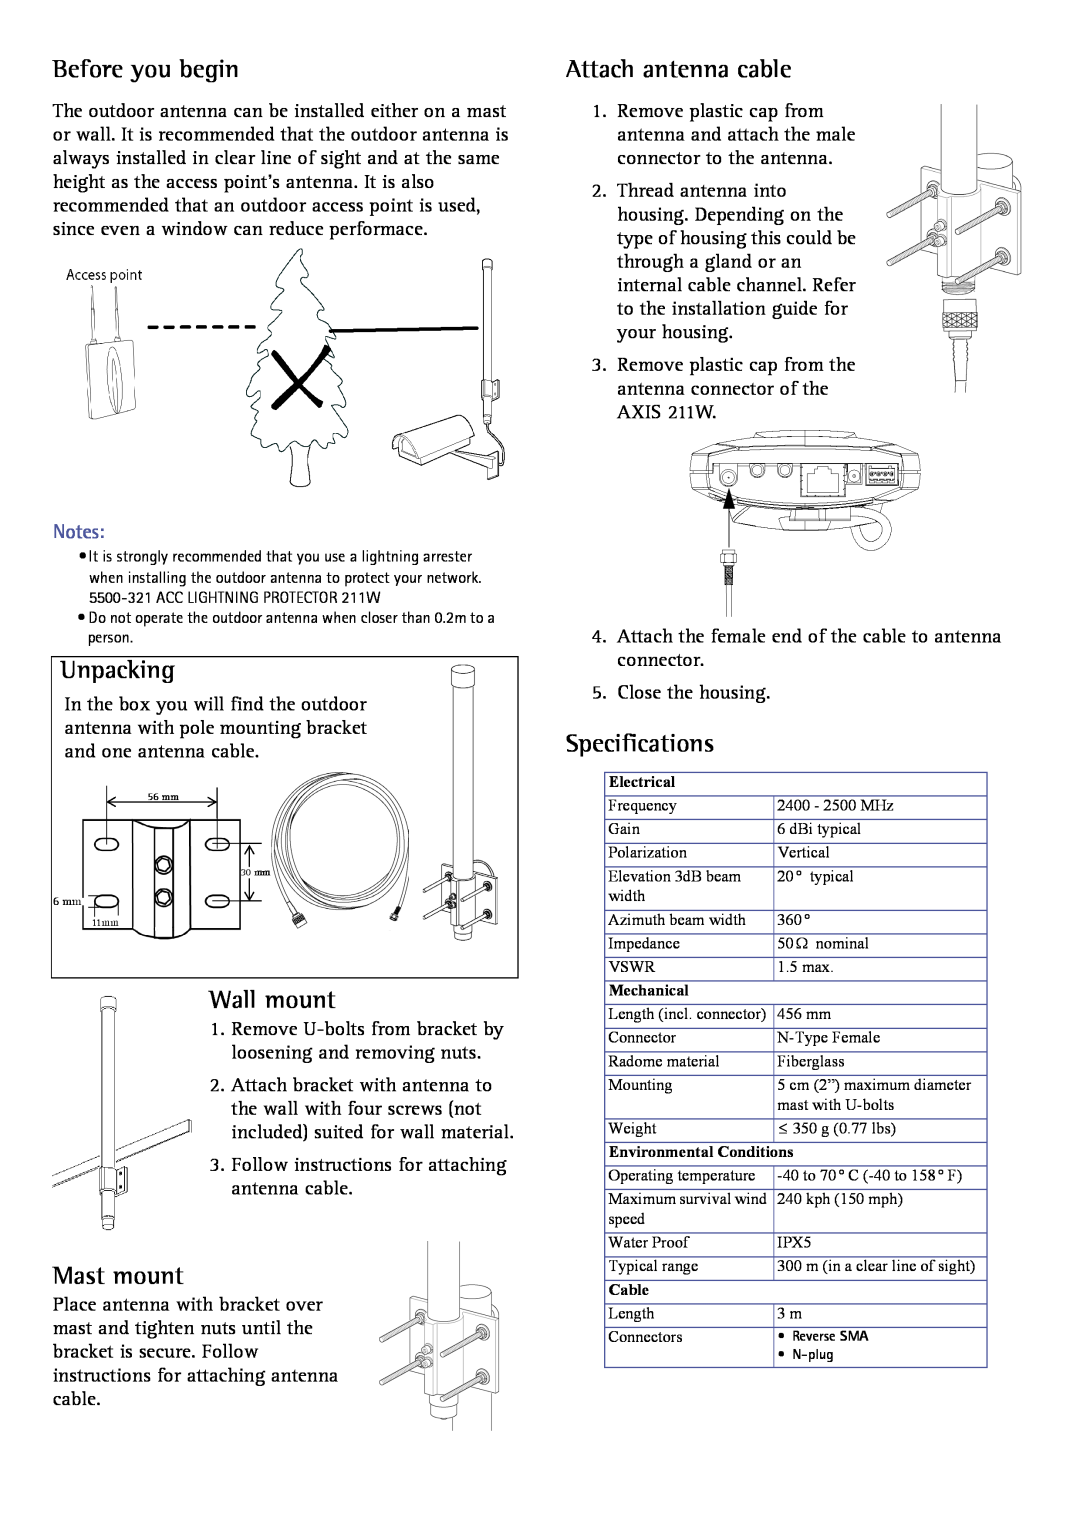 Axis Communications Outdoor Antenna manual Before you begin, Unpacking, Wall mount, Mast mount, Attach antenna cable 